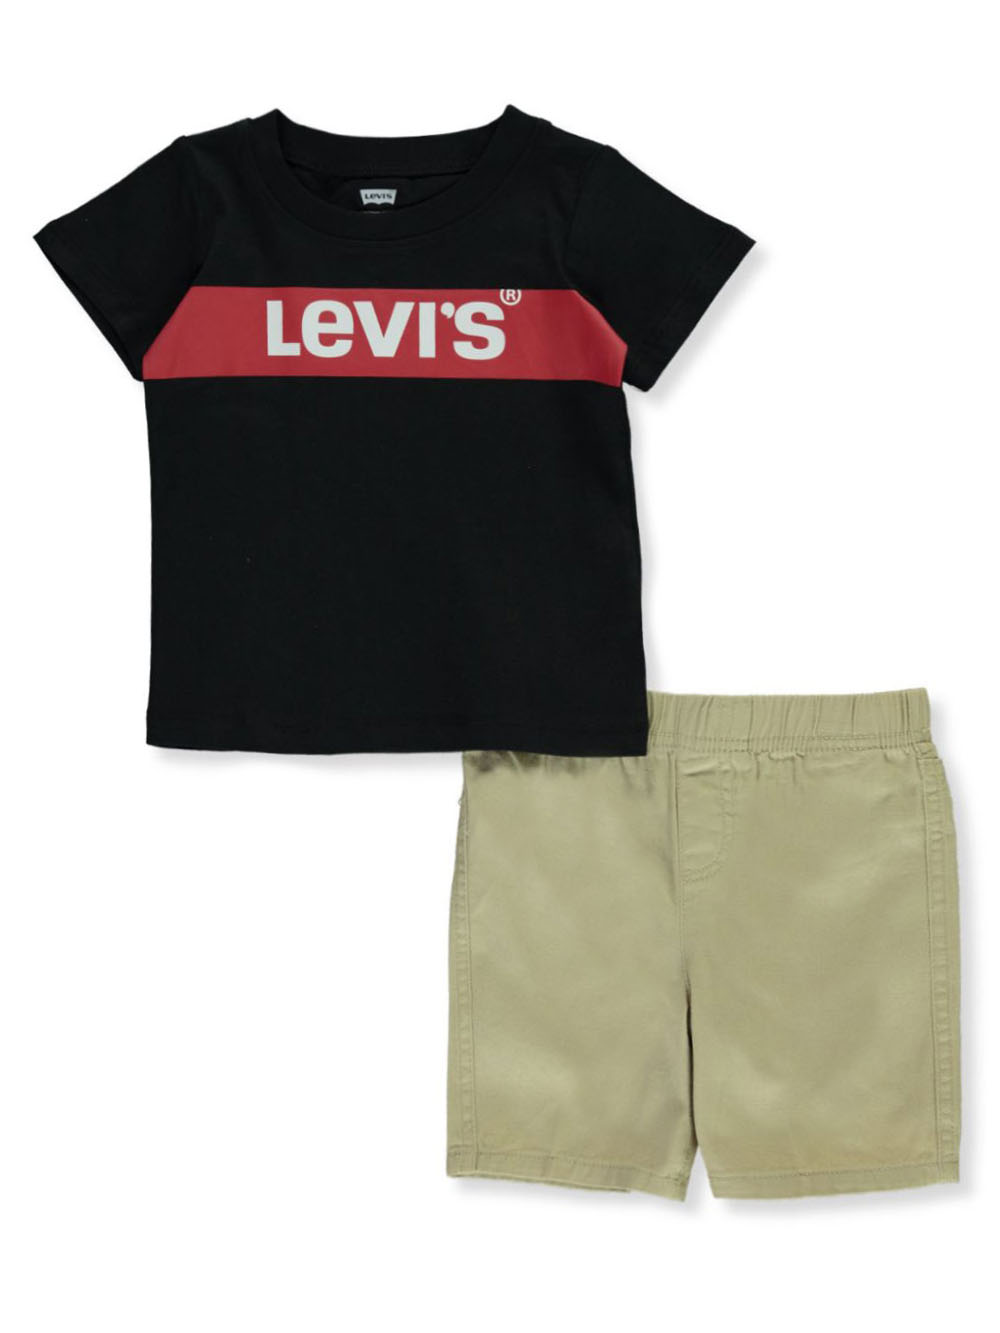 Levi's Baby Boys' 2-Piece Camo Twill Shorts Set Outfit